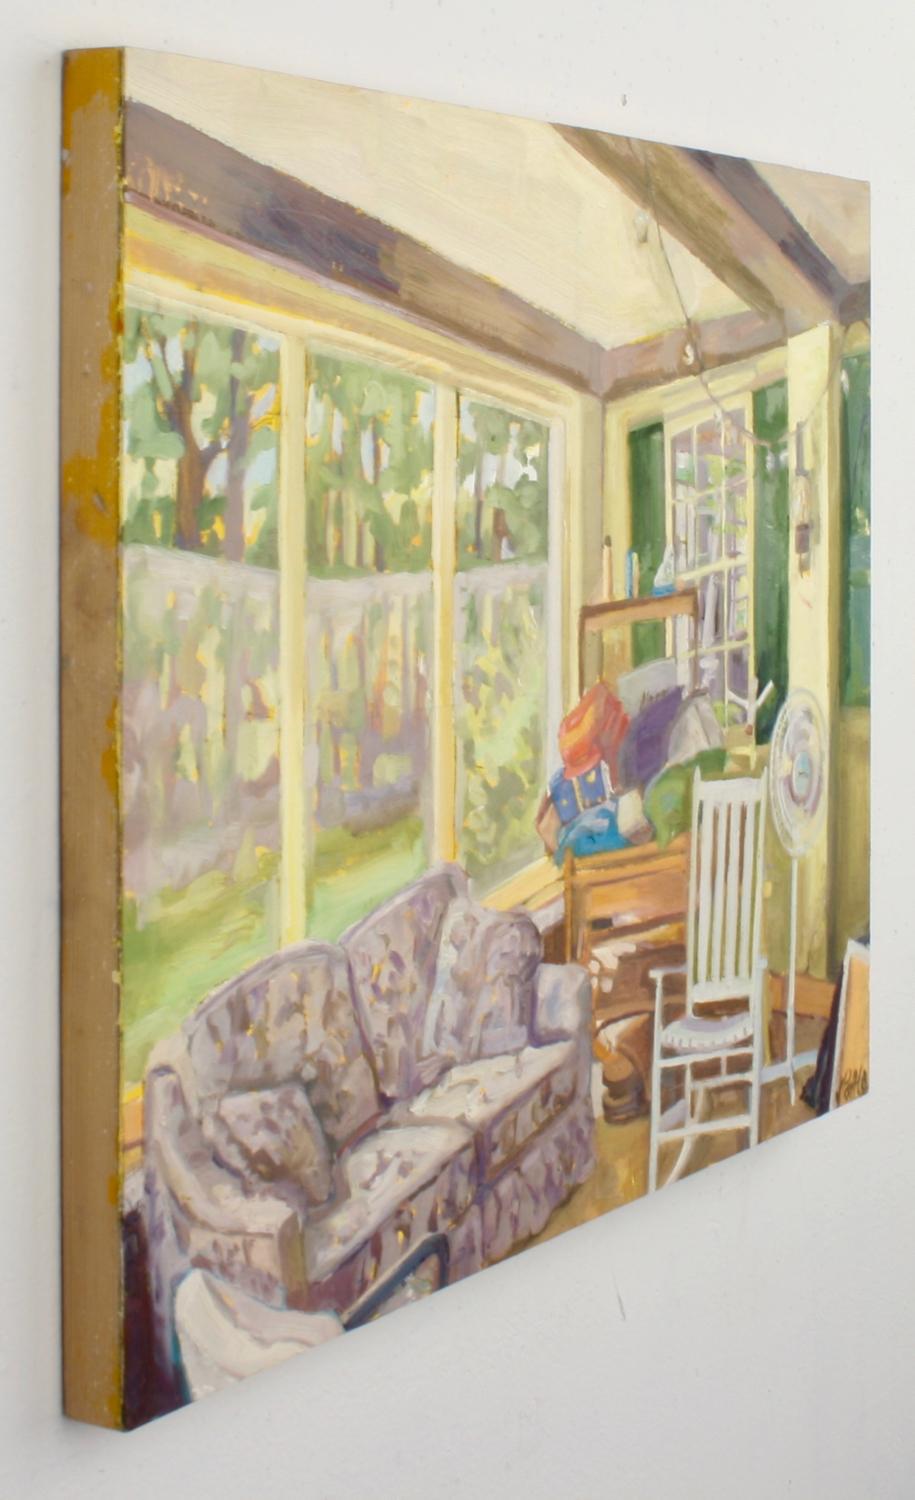 Jill Pottle’s interior titled “Daron’s Porch” is part of a new series titled “Interiors.” Jill started interiors four years ago and tries to capture the light pouring in and often times engages the outside world thru window views. In this 16 x 20